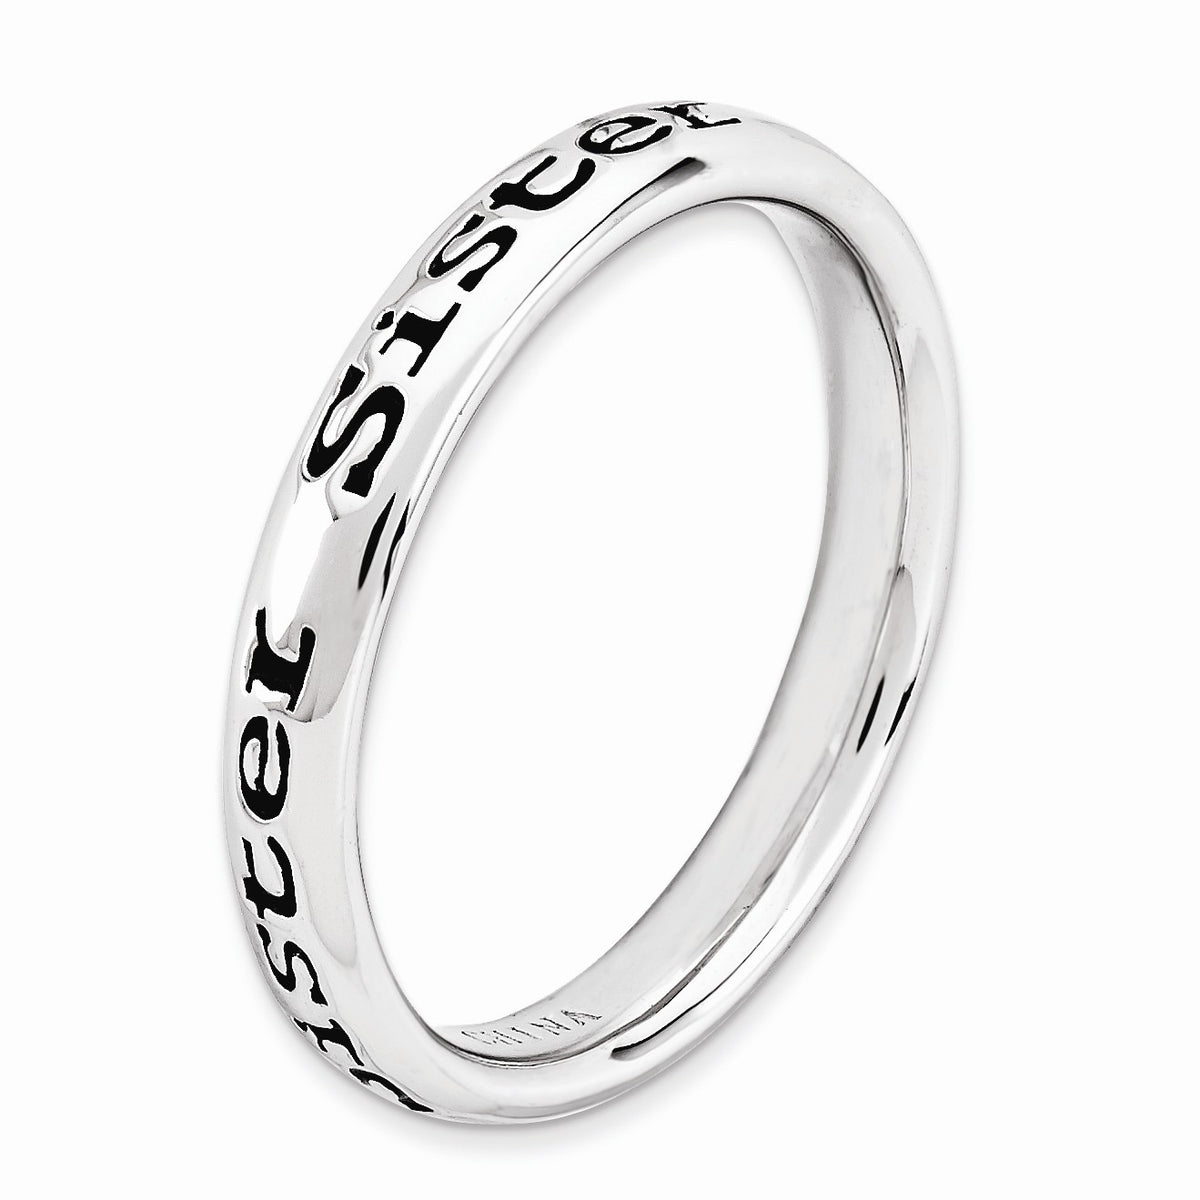 Alternate view of the 3.5mm Sterling Silver Stackable Black Enamel Sister Script Band by The Black Bow Jewelry Co.